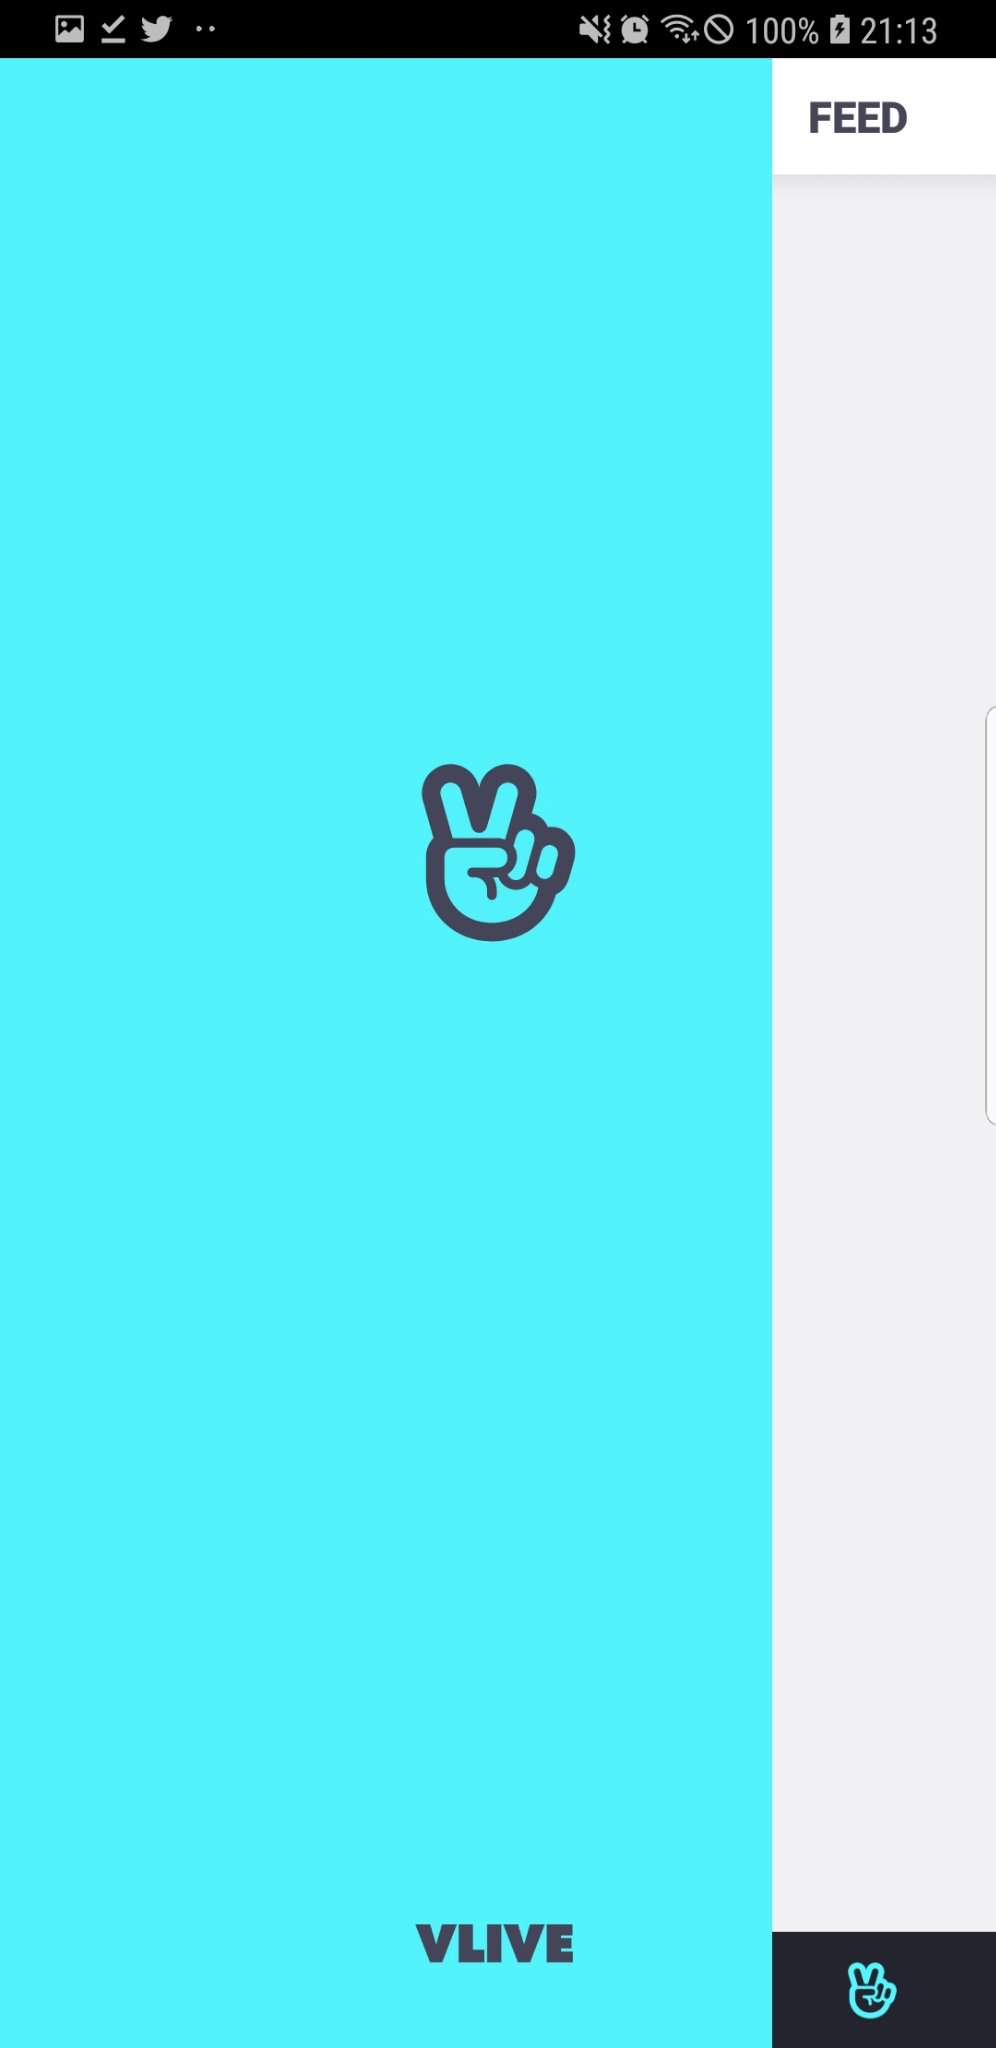 vlive app connected devicxe